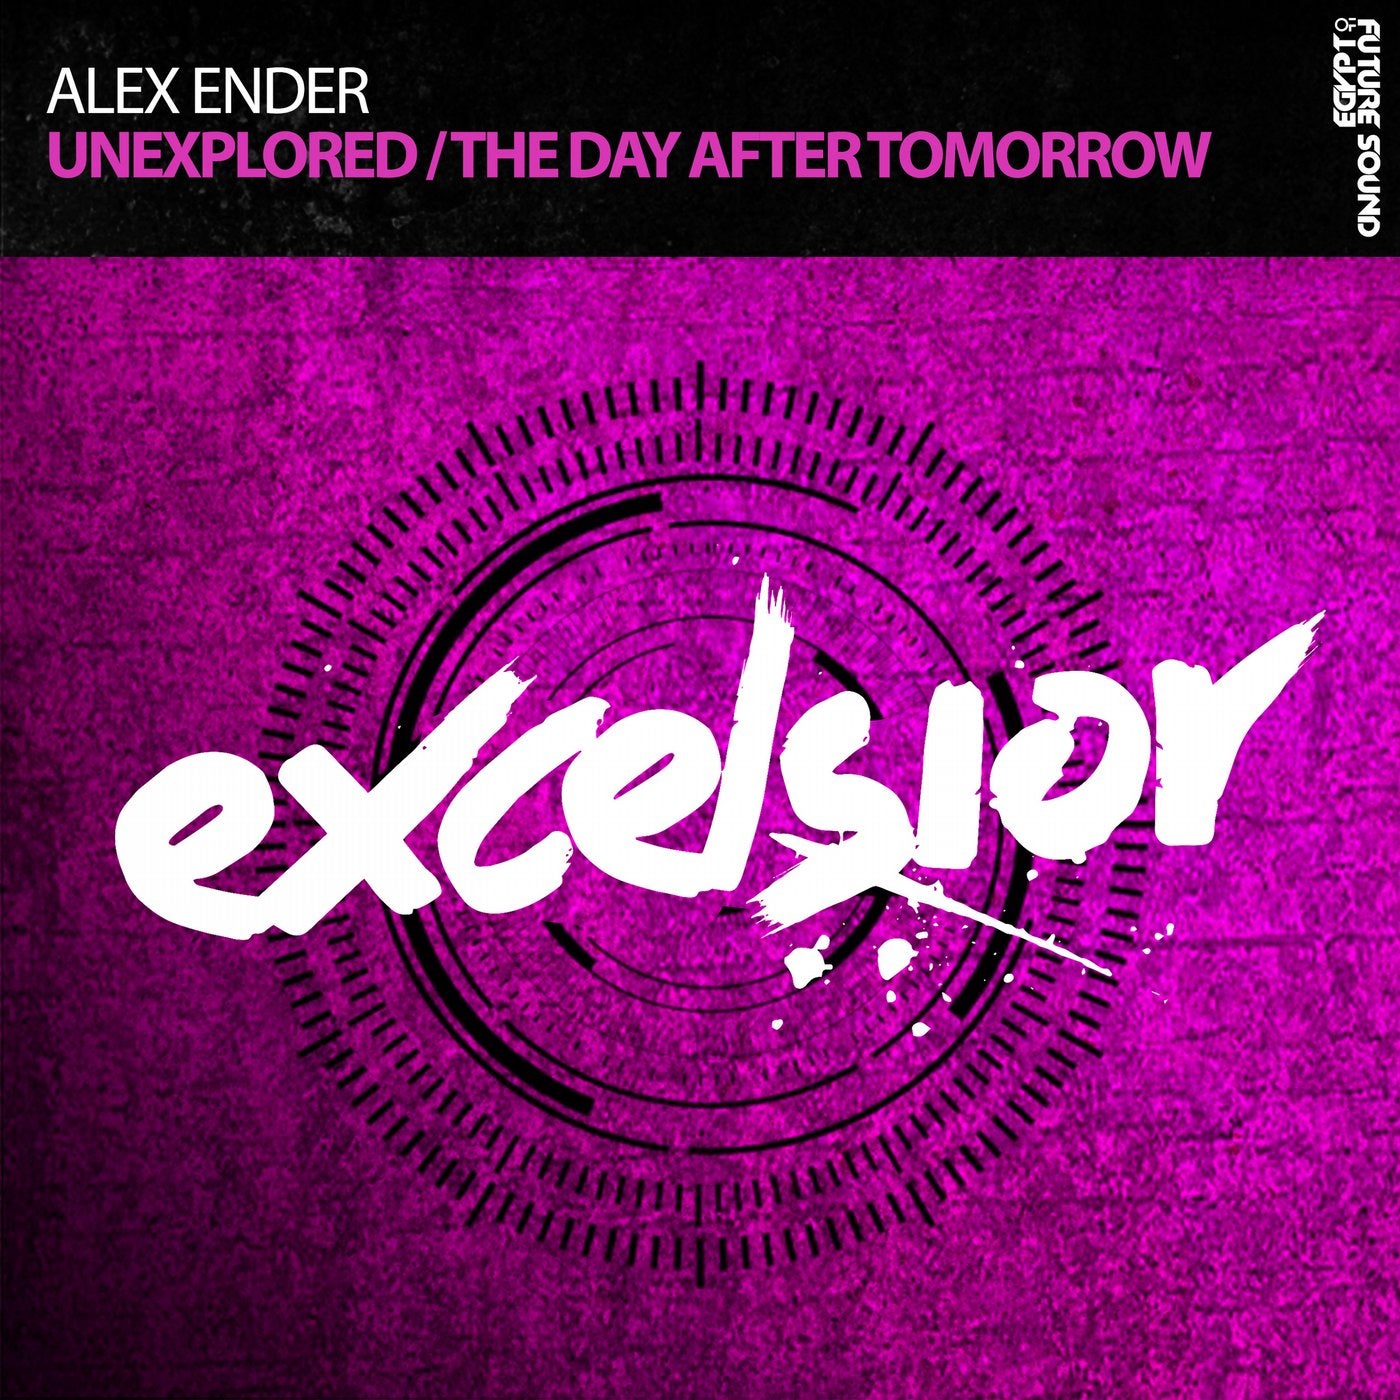 Unexplored / The Day After Tomorrow